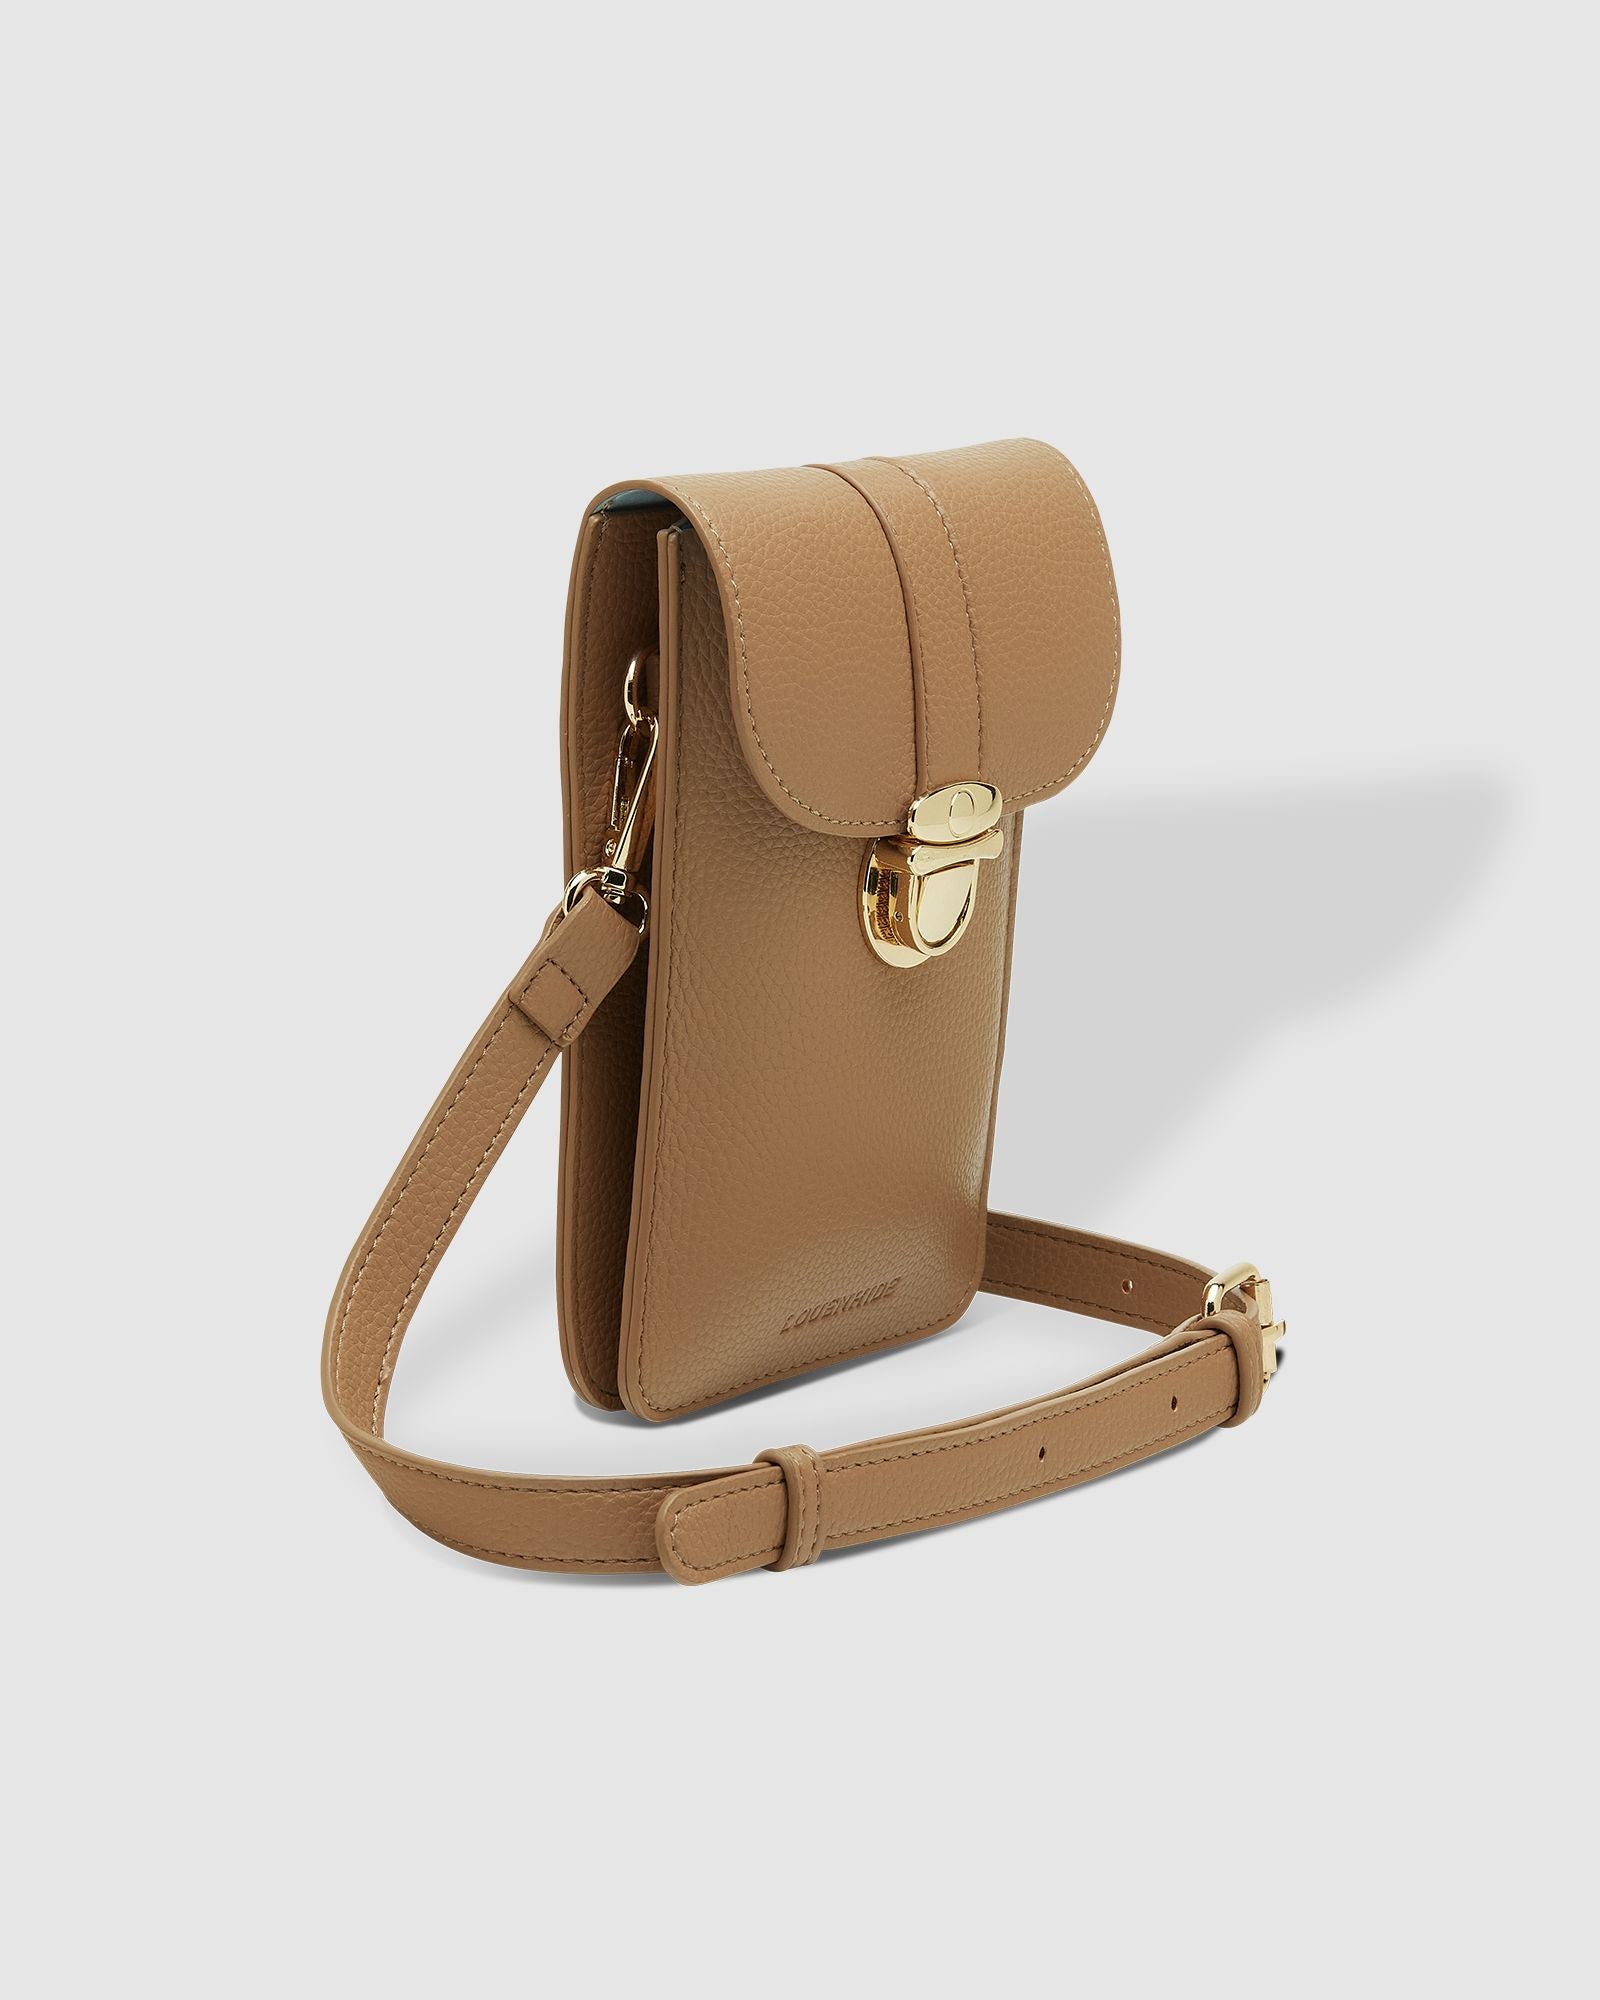 The Louenhide Fontaine Phone Crossbody Bag is the perfect accessory. While offering versatility and fuss-free functionality to your day-to-day life, you can keep your phone and everyday essentials within reach without sacrificing style.